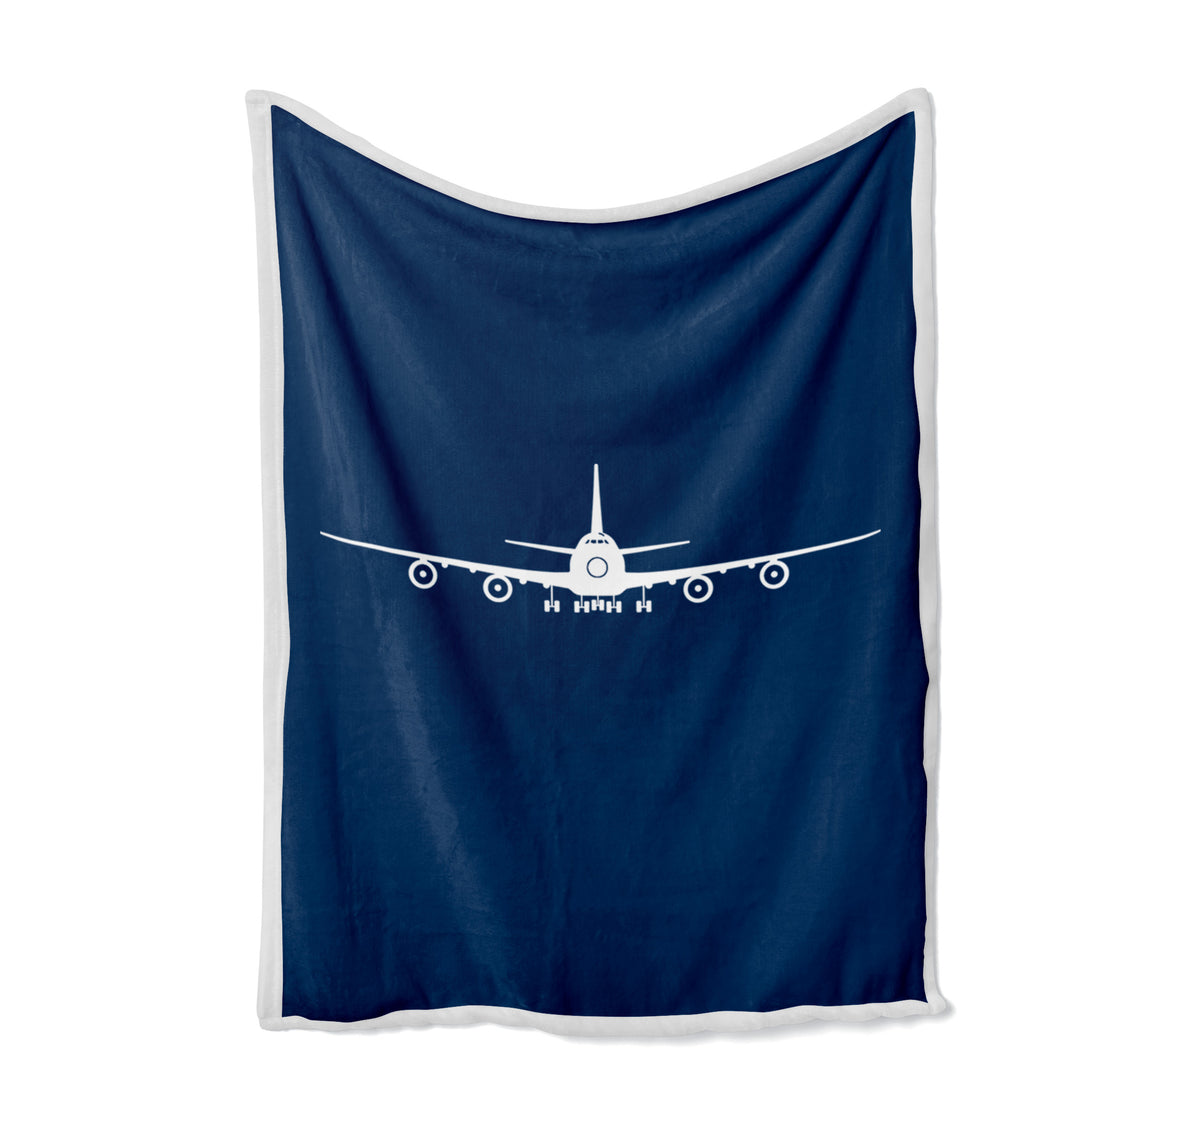 Boeing 747 Silhouette Designed Bed Blankets & Covers – Aviation Shop